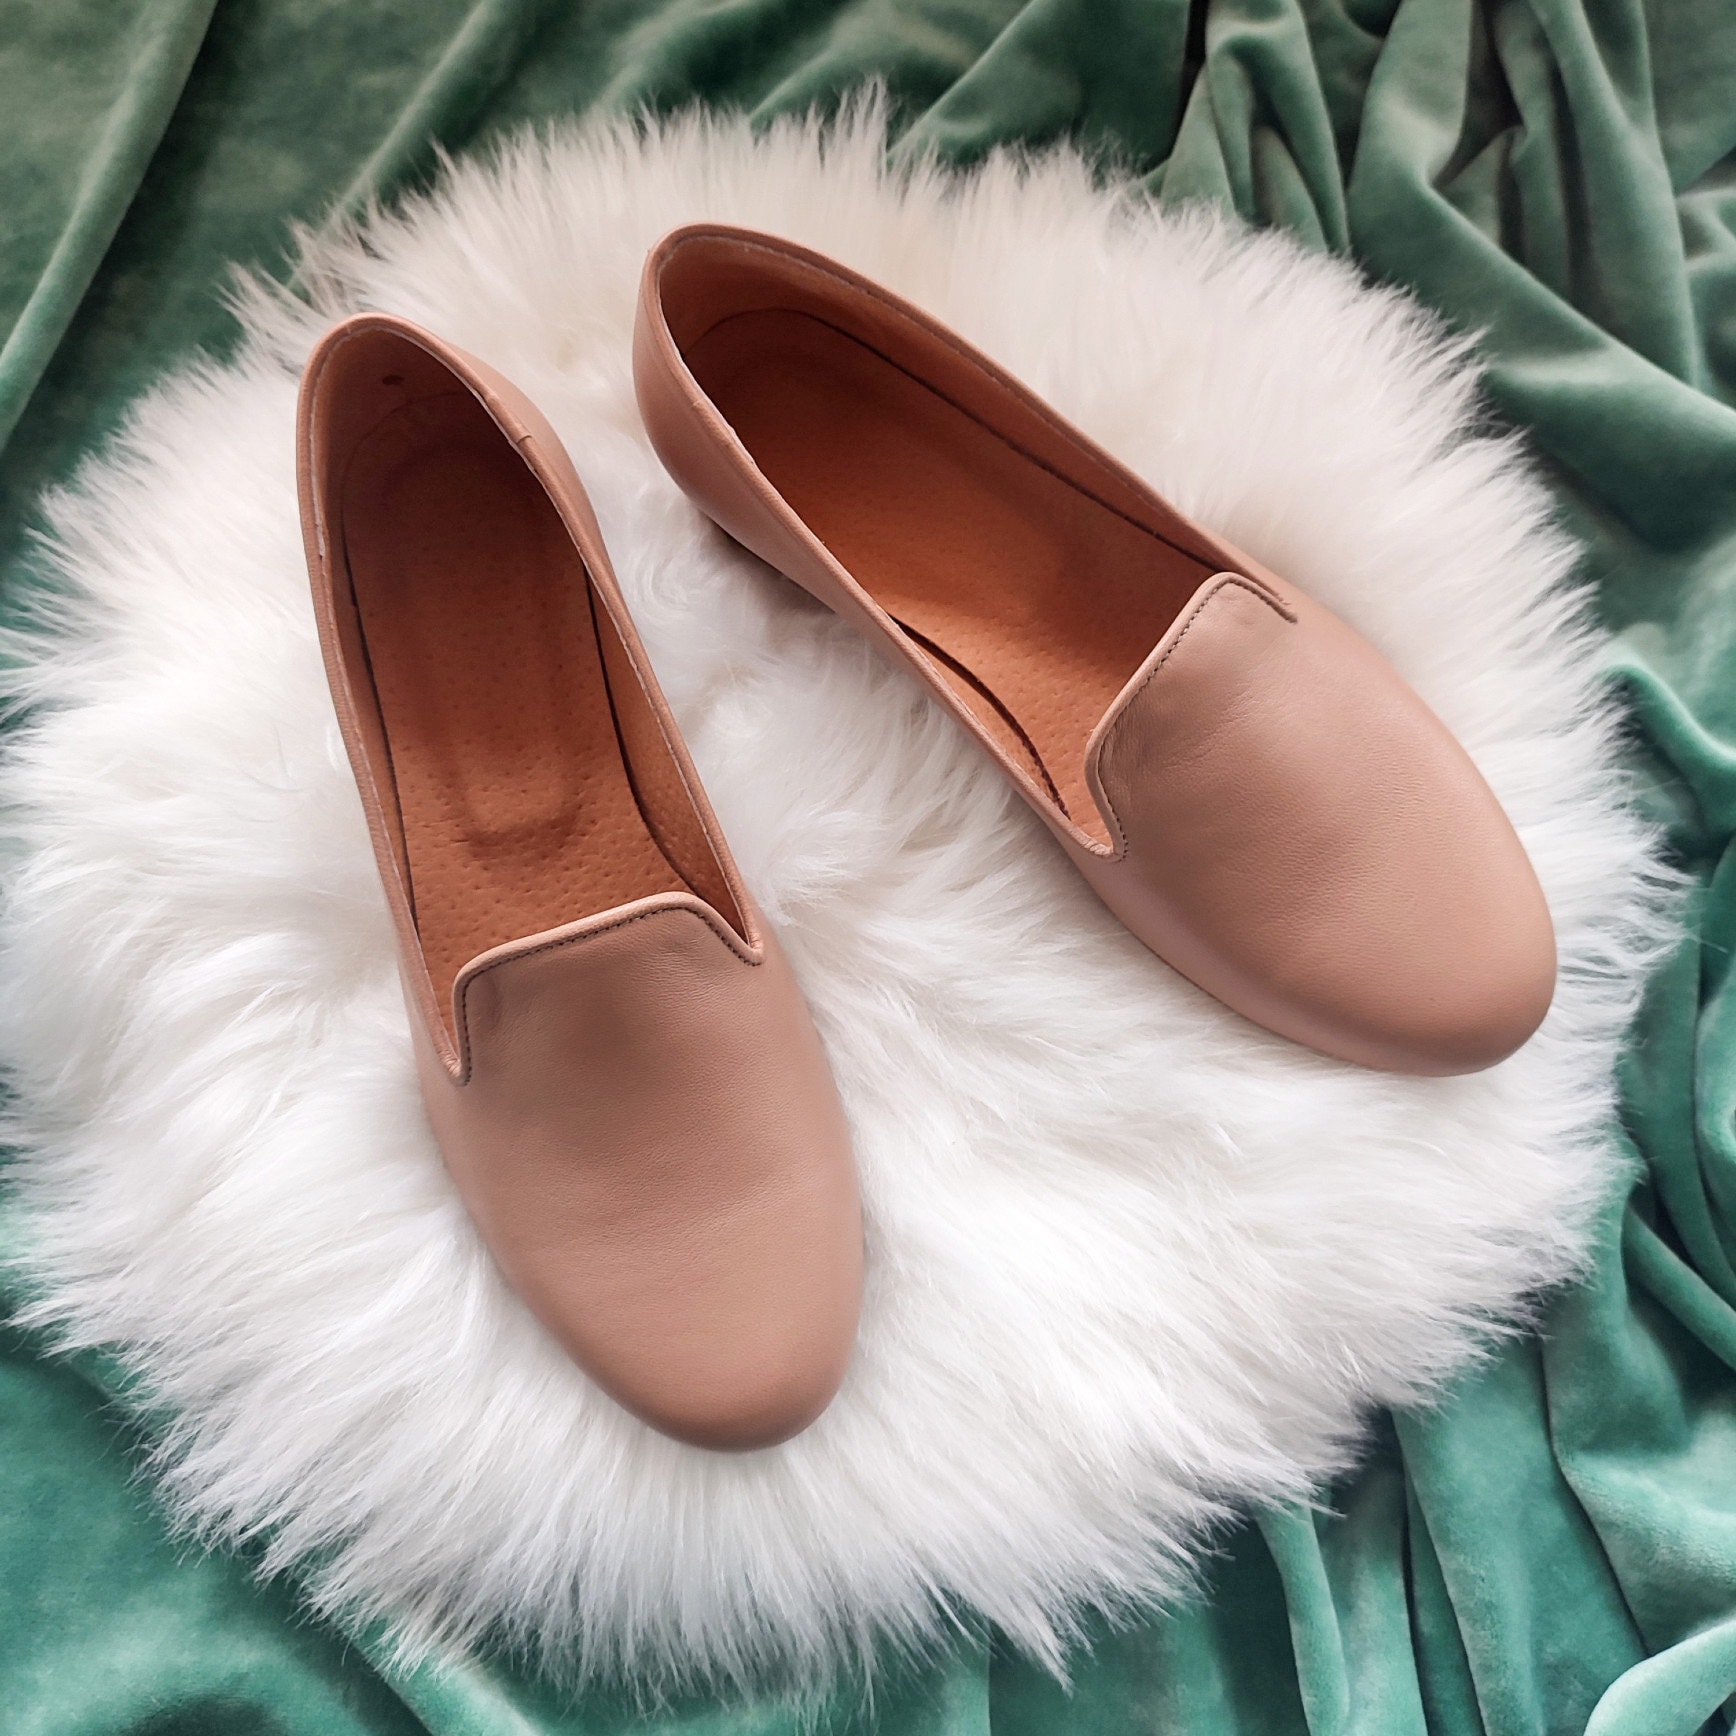 Business Woman Nude Beige Moccasins Women's Leather - Etsy